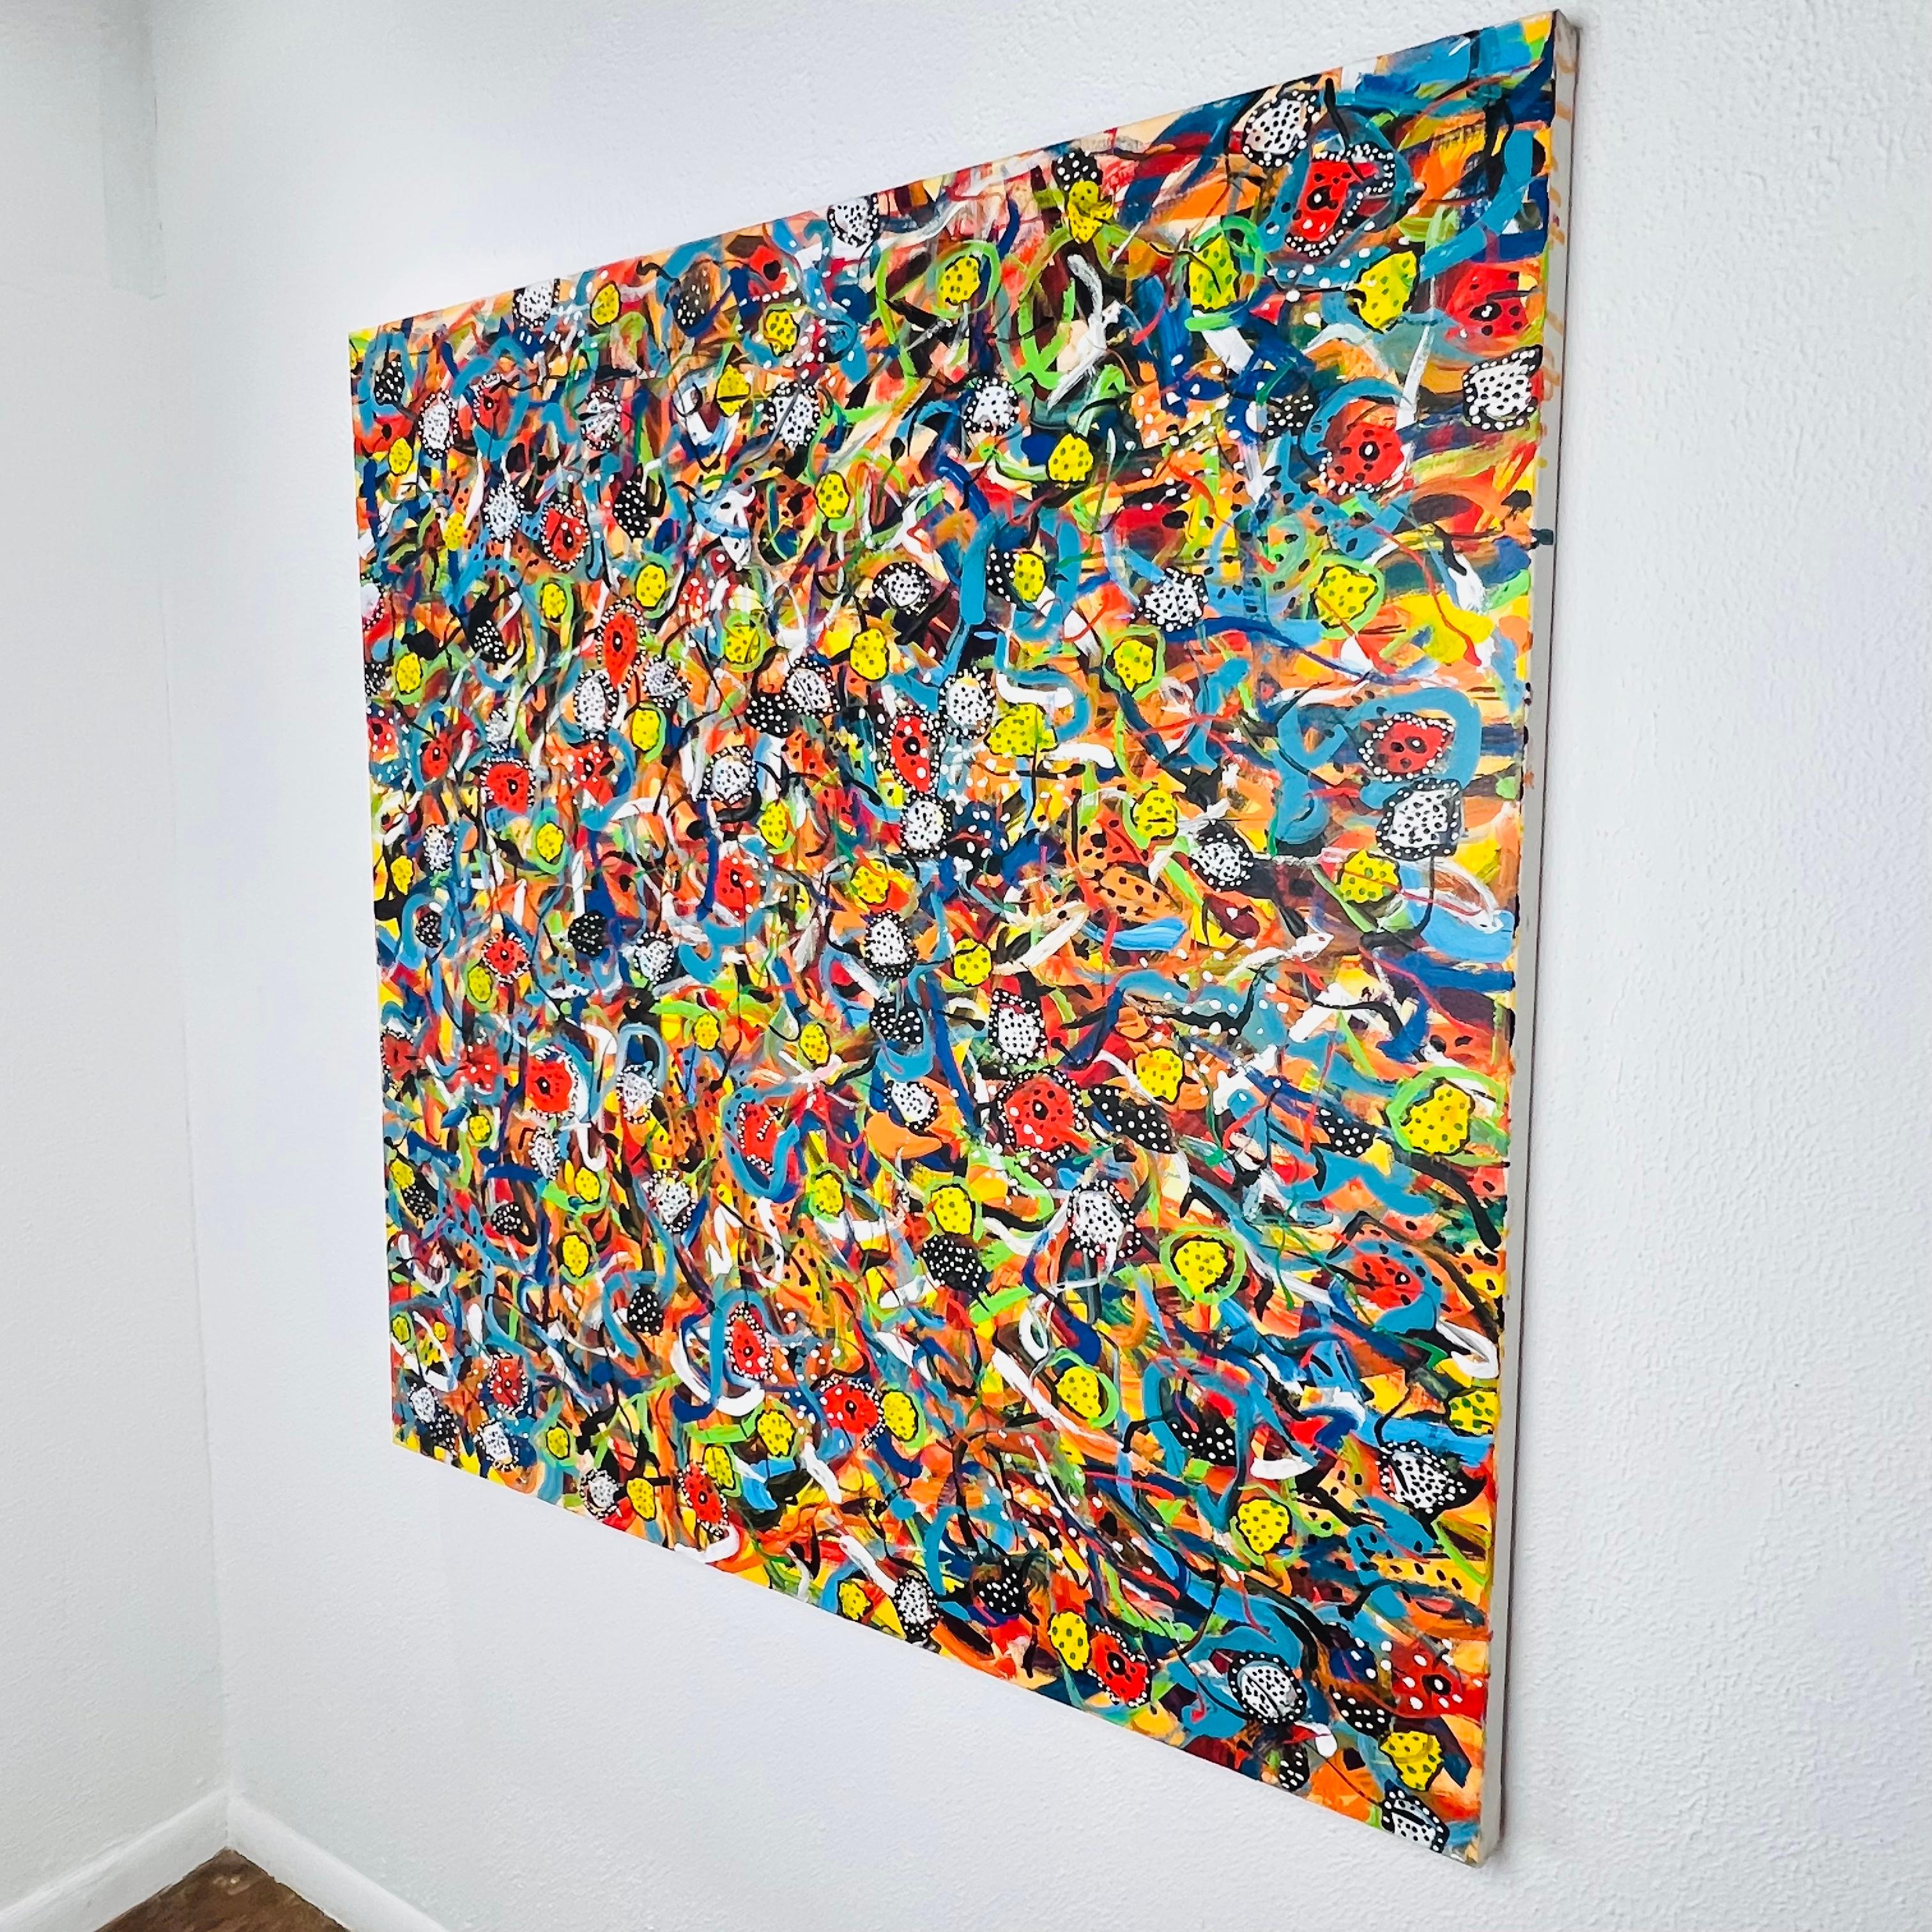 Esther Ritz, born New York City, has been working as an abstract painter and contemporary artist in Dallas for the last twenty years. She is represented at the Meyerovich Gallery in San Francisco. Her paintings were featured in the Huffington Post,